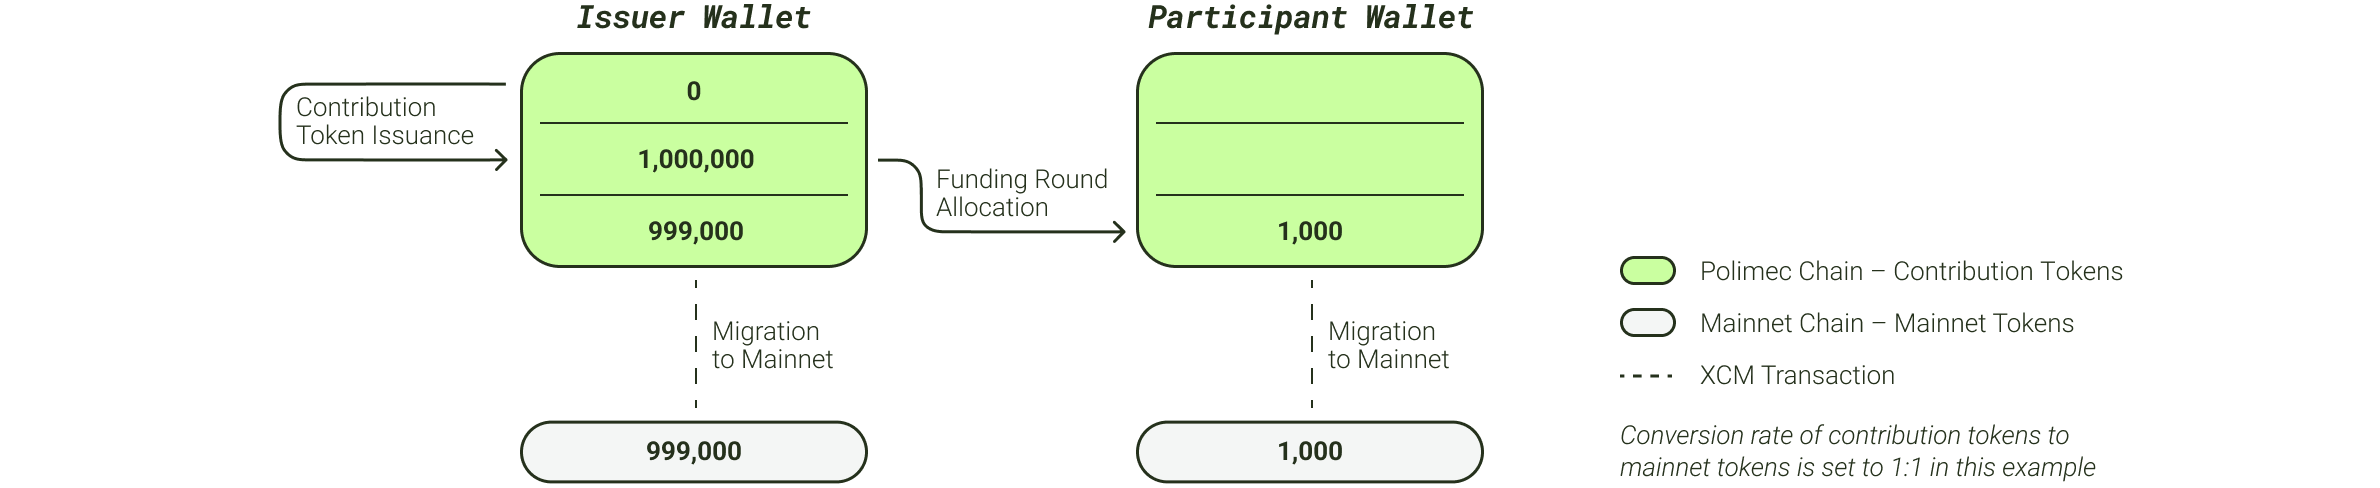 The contribution token issuance and mainnet migration